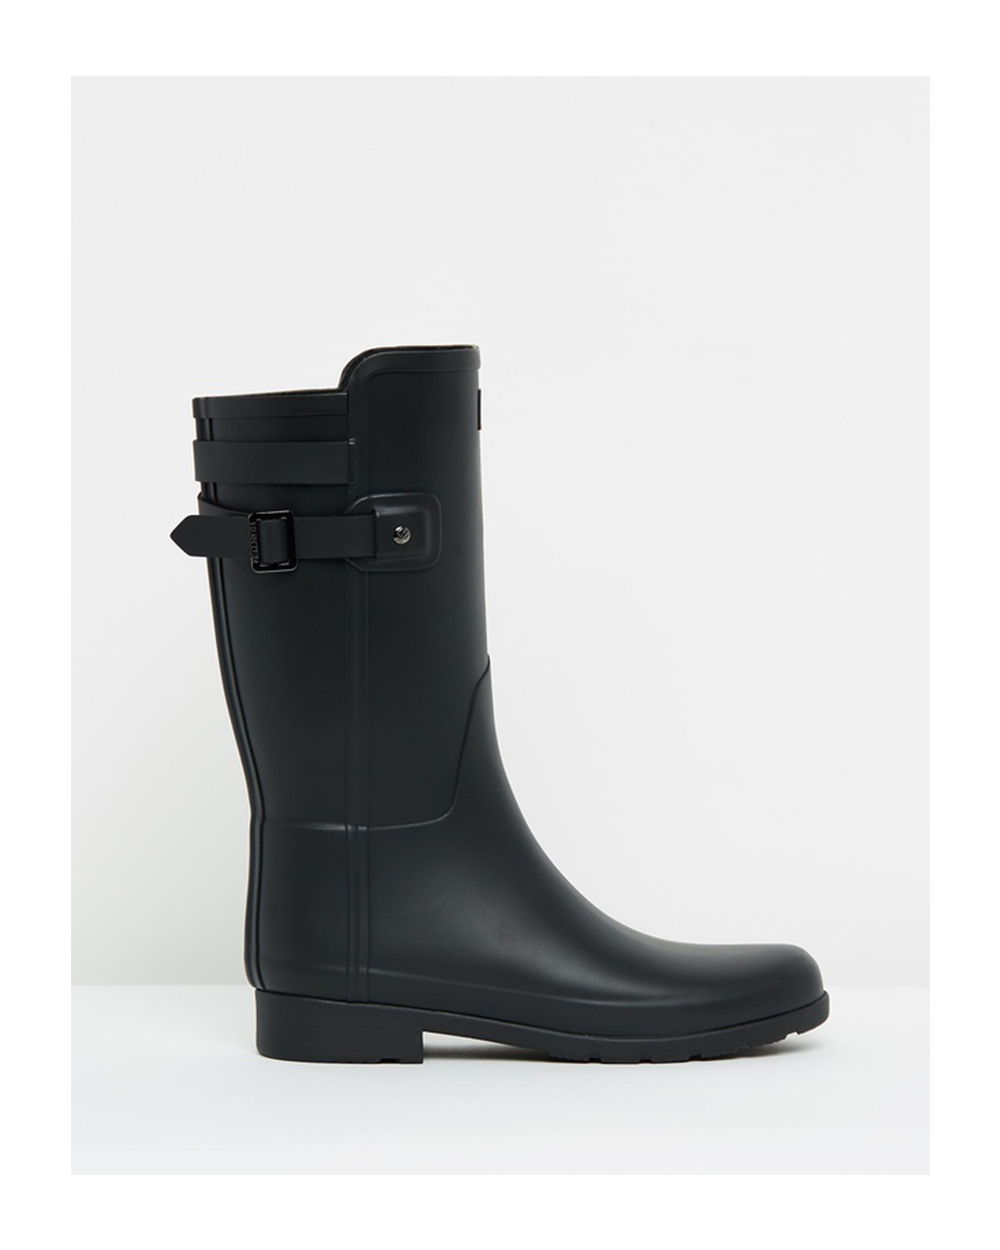 Hunter gumboots, $219 AUD from The Iconic